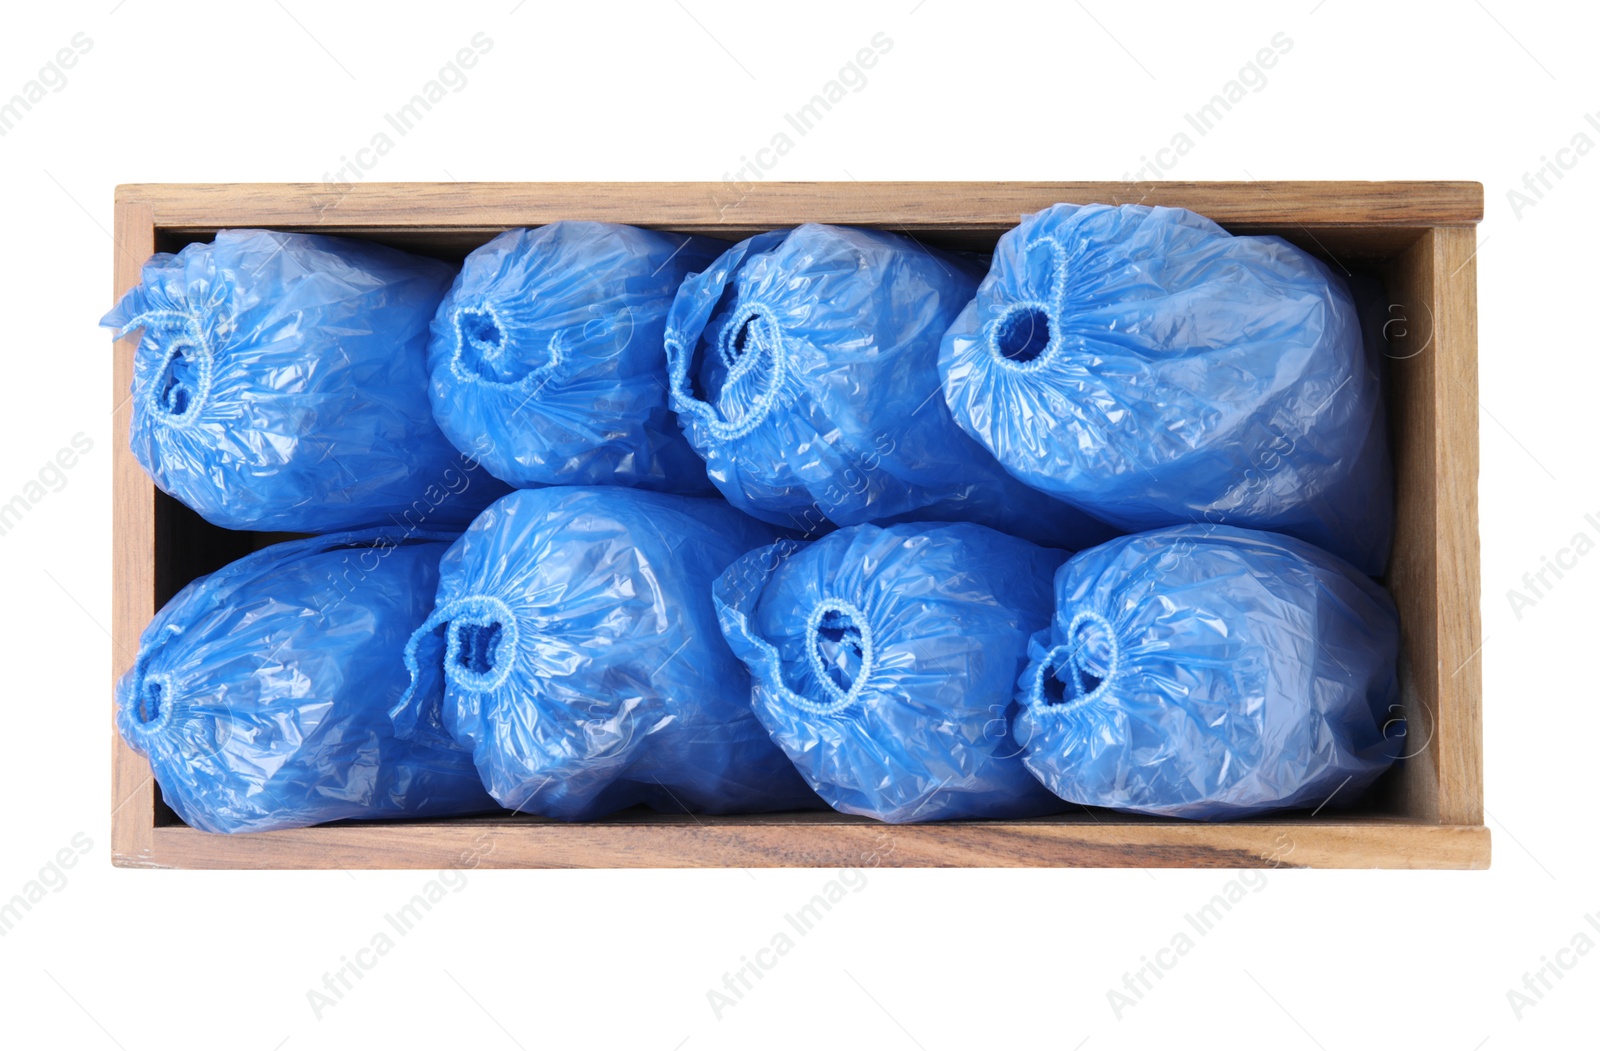 Photo of Rolled blue shoe covers in wooden crate isolated on white, top view